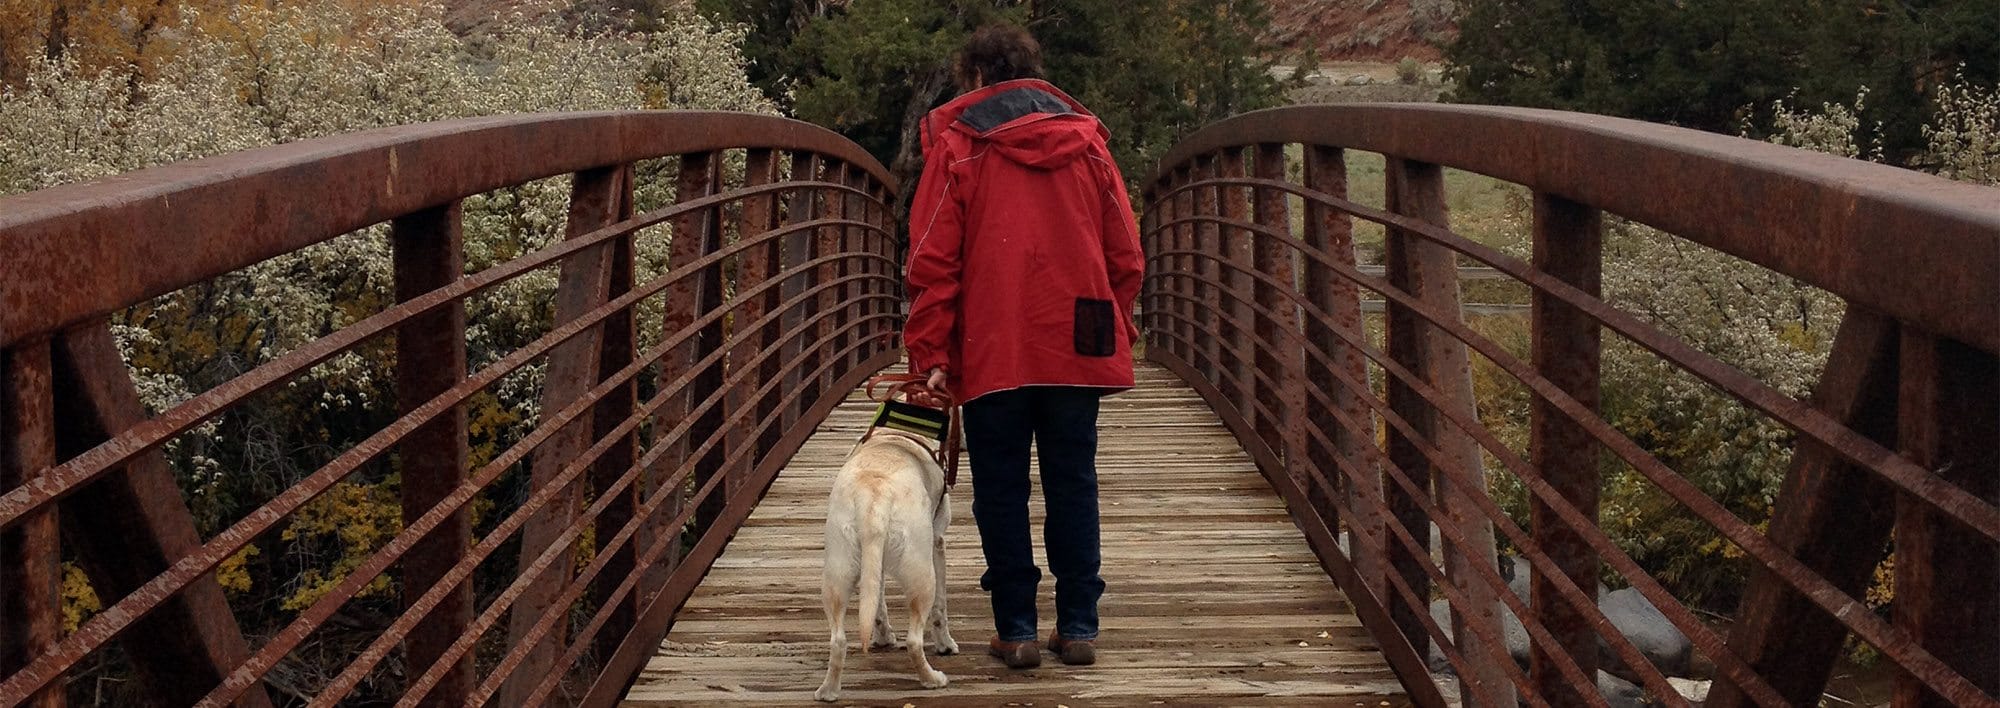 A woman wearing a red coat walks away from the camera with a yellow lab in harness across a wooden bridge on a fall day